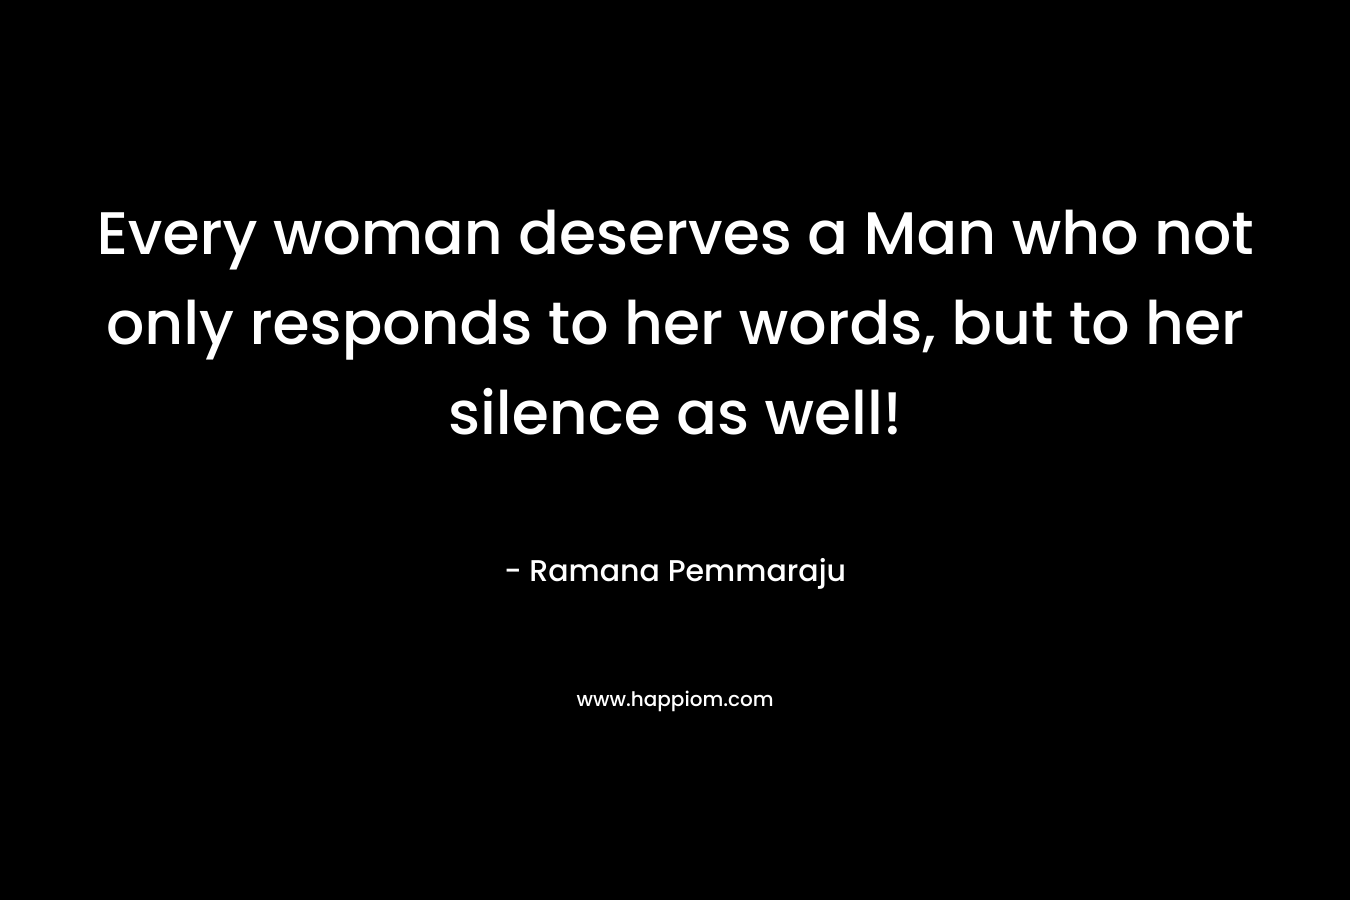 Every woman deserves a Man who not only responds to her words, but to her silence as well!